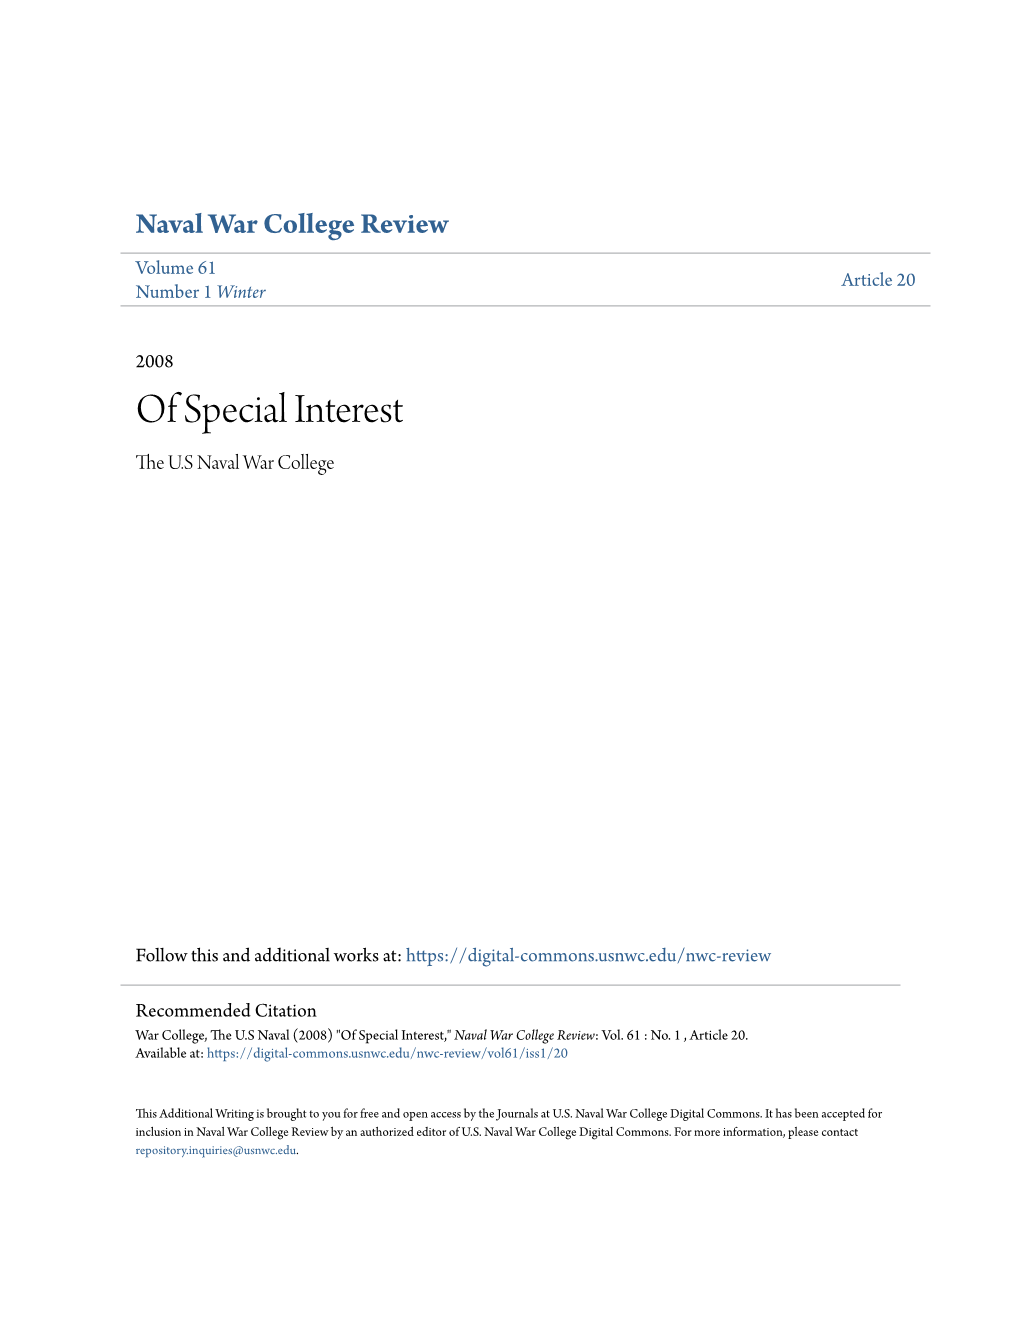 Of Special Interest the .SU Naval War College